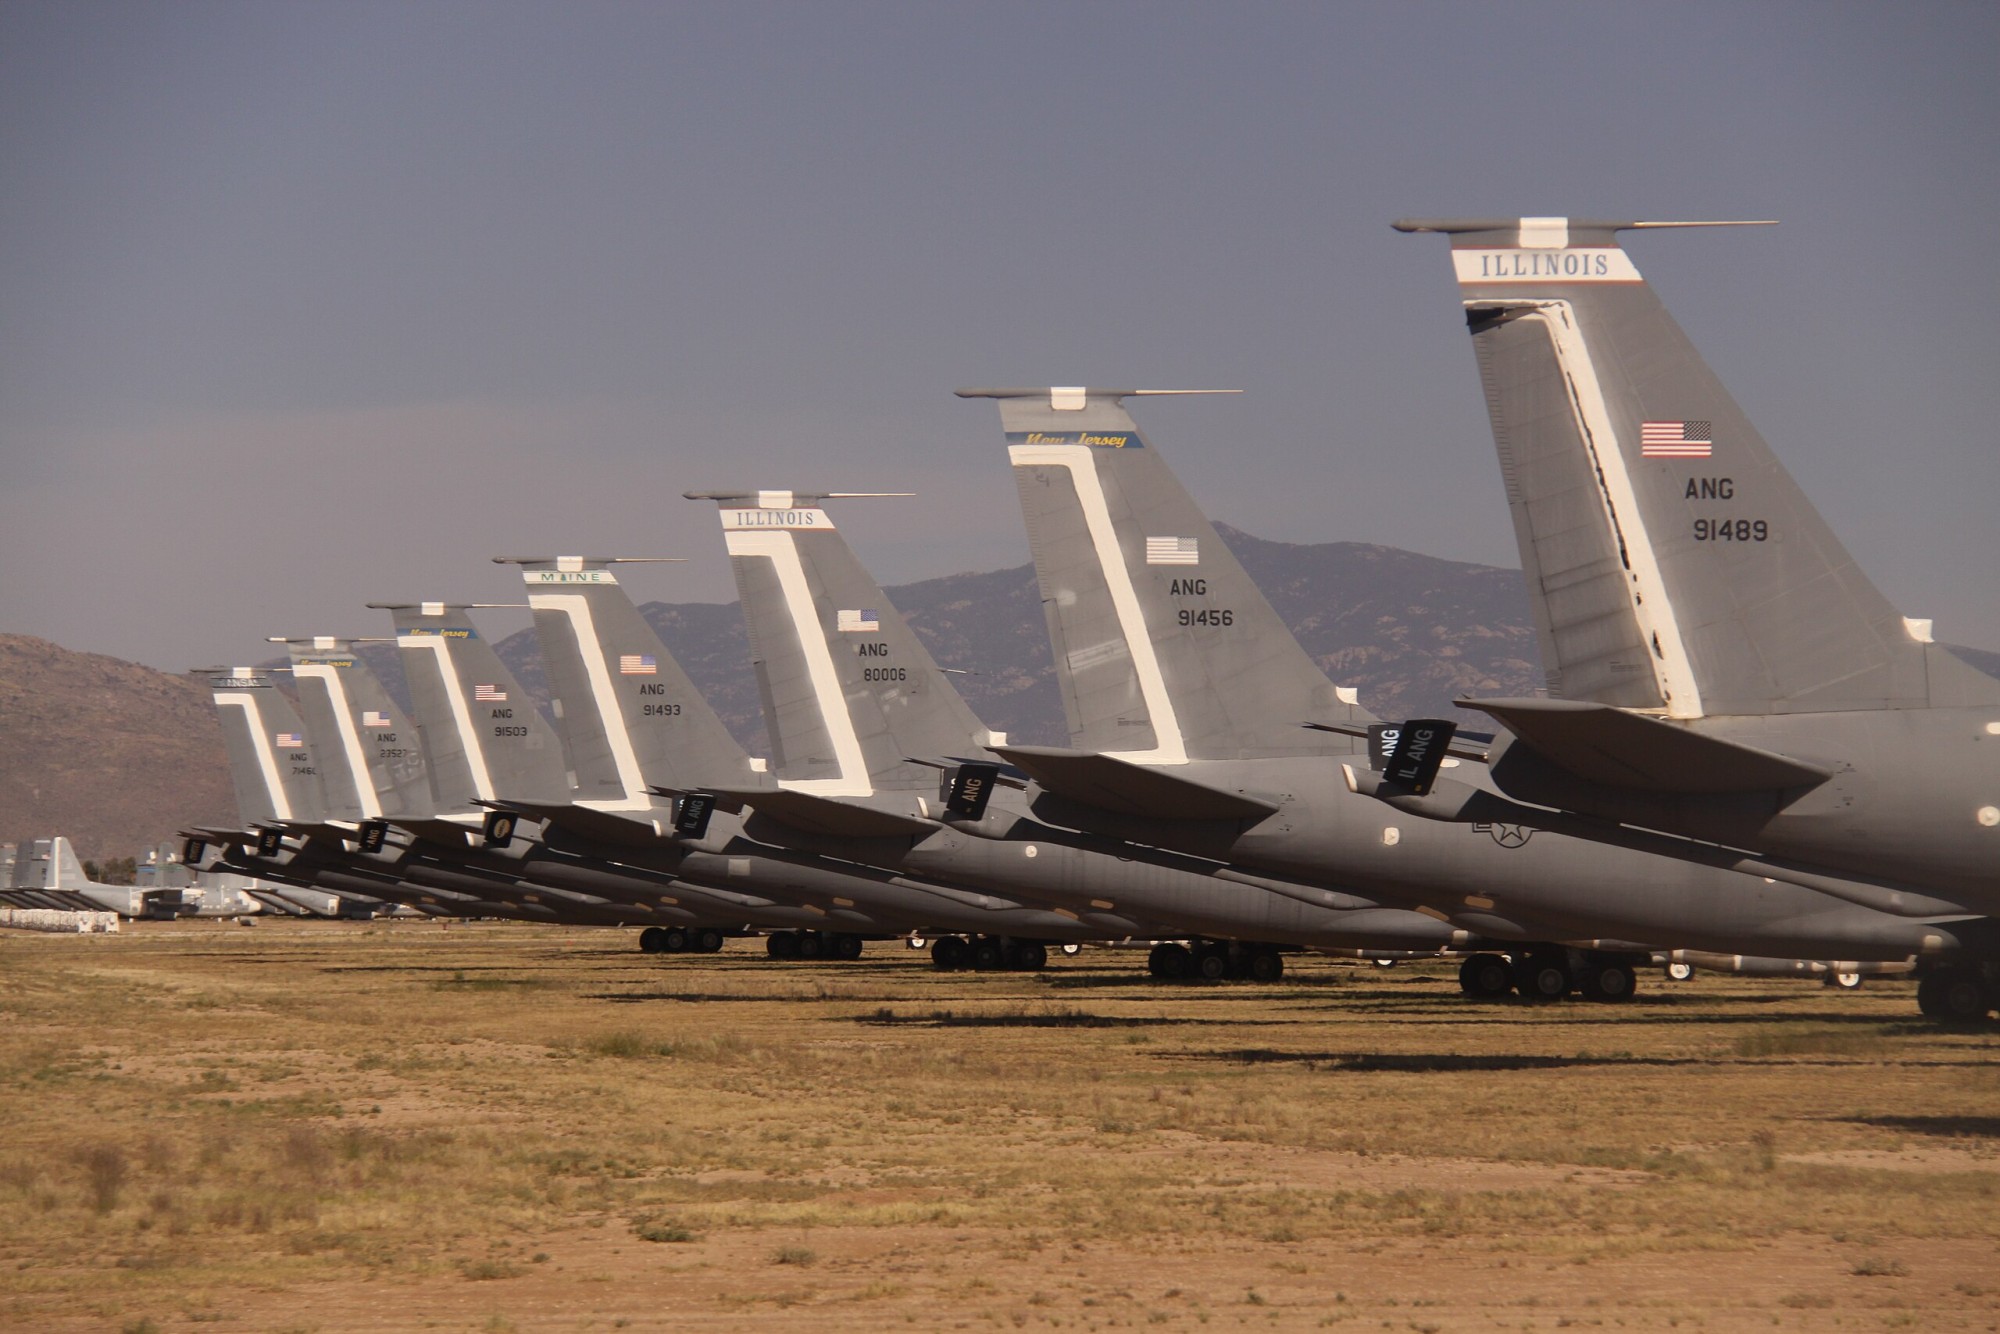 The sheer scale of the graveyard is overwhelming, with thousands of aircraft stretching out across the desert landscape. It's a surreal sight, reminiscent of a post-apocalyptic scene, where human achievements decay in the desert sun.